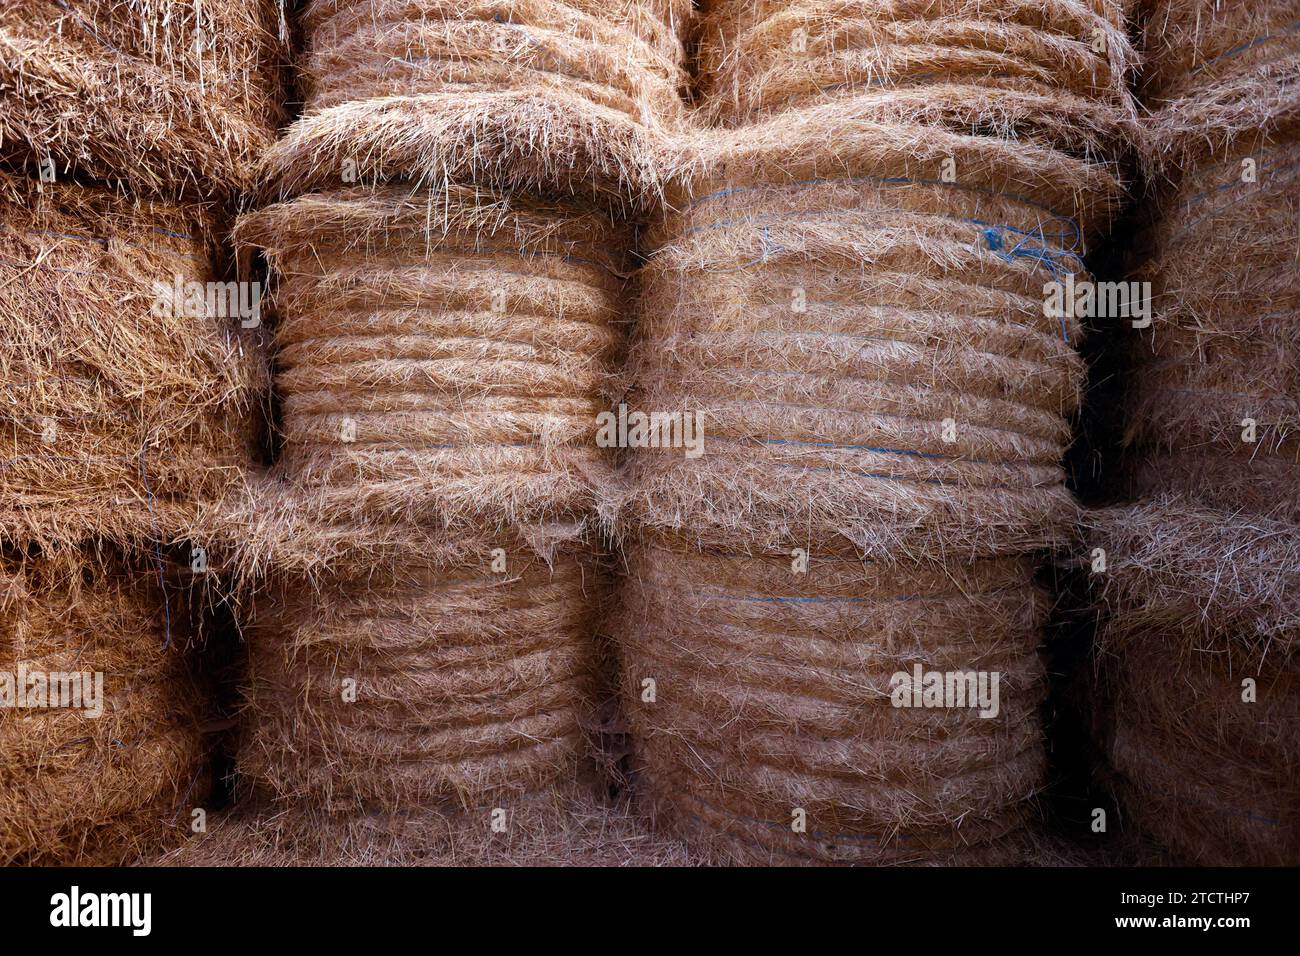 Stacked round yellow hay bales tightly bound in a farm. Stock Photo